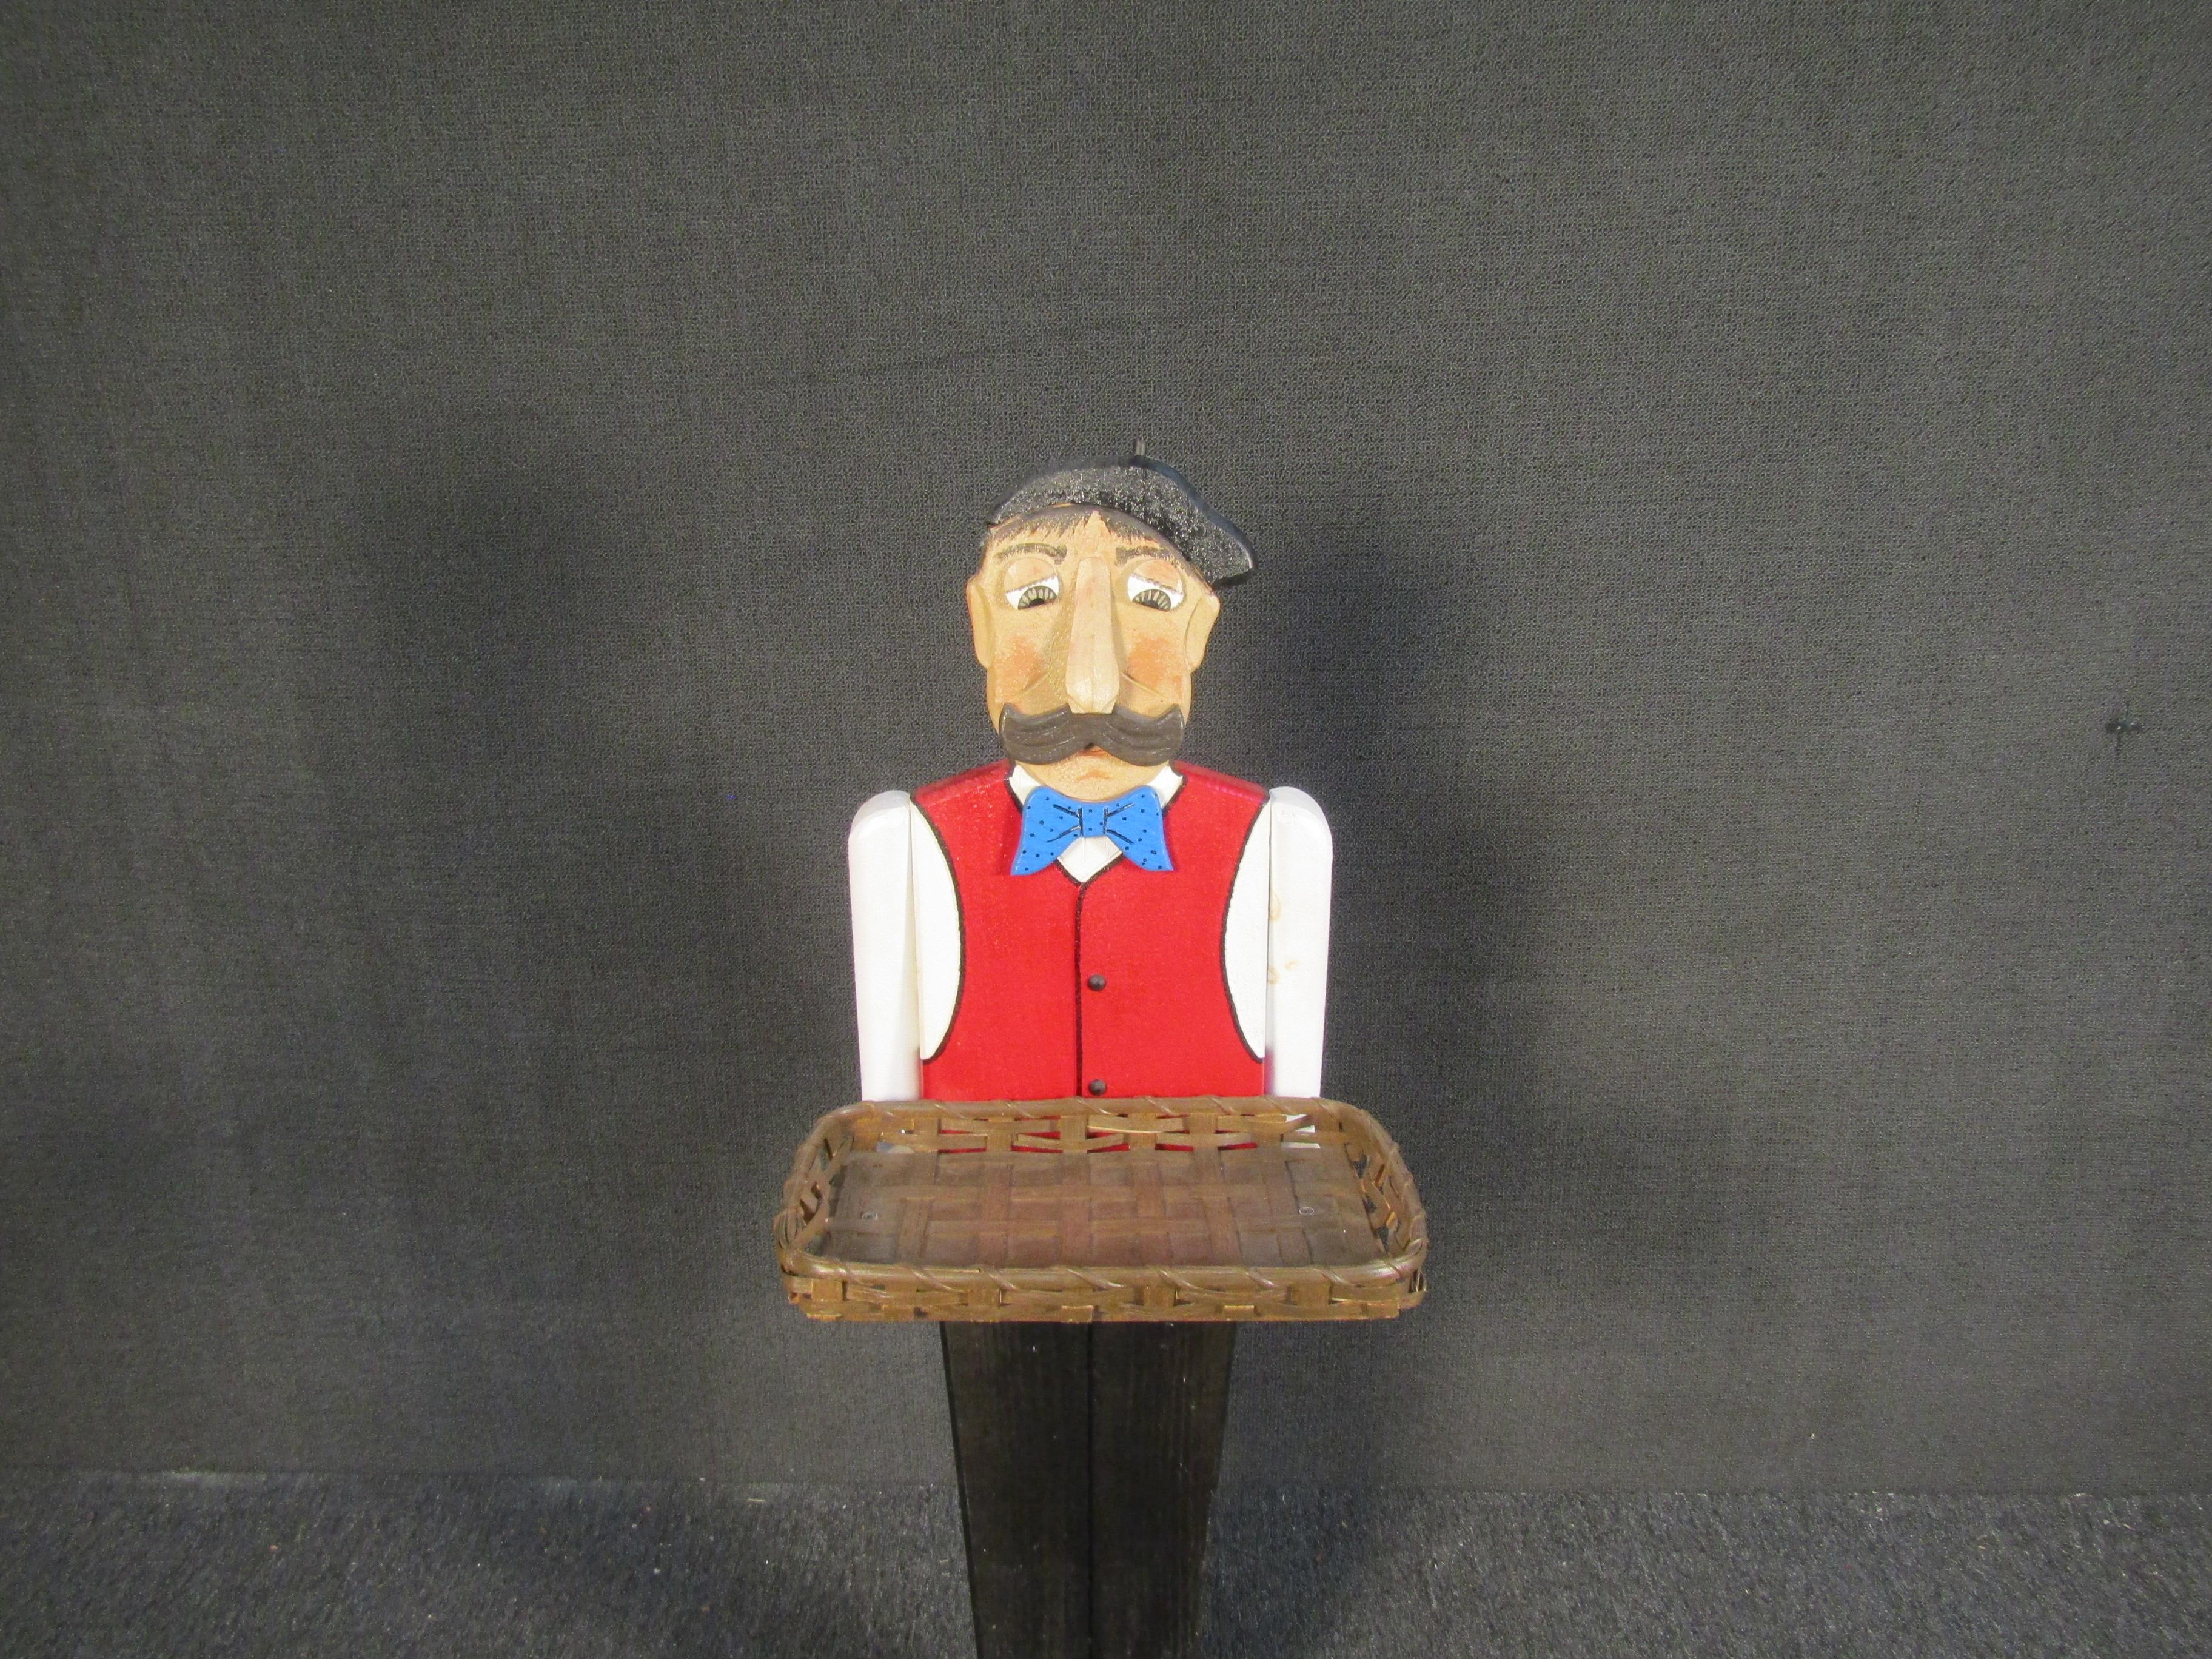 This vintage decorative sculpture depicts a waiter and includes a wicker serving tray for placing items on. Unusual and unique, this vintage piece can add decorative flair to a kitchen or dining room. Please confirm item location with seller (NY/NJ).